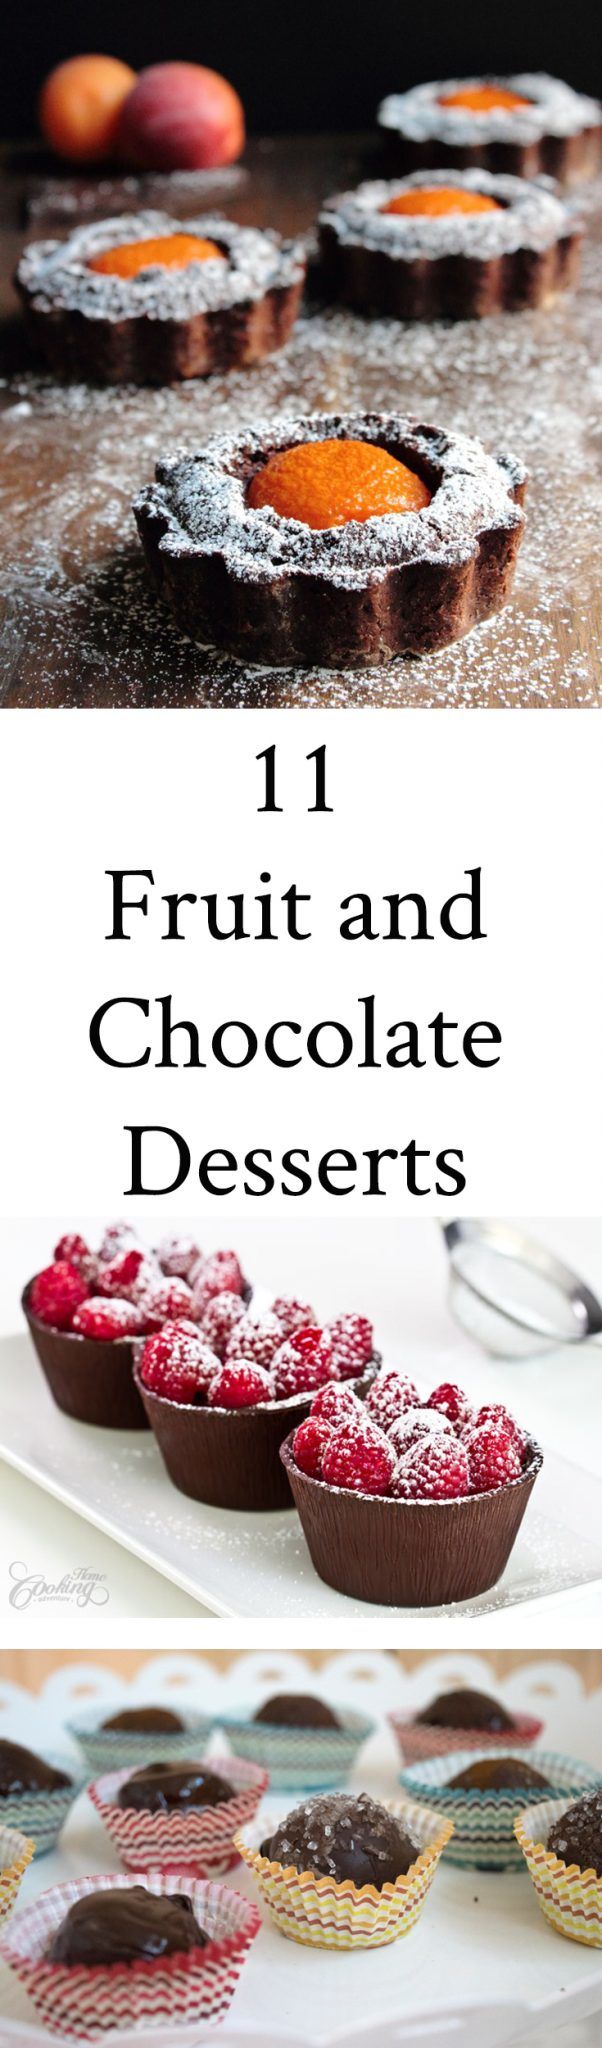 Some foods are just meant to go together...Fruit and Chocolate are one of those divine pairings. Recipes for 11 great Fruit and Chocolate Desserts.